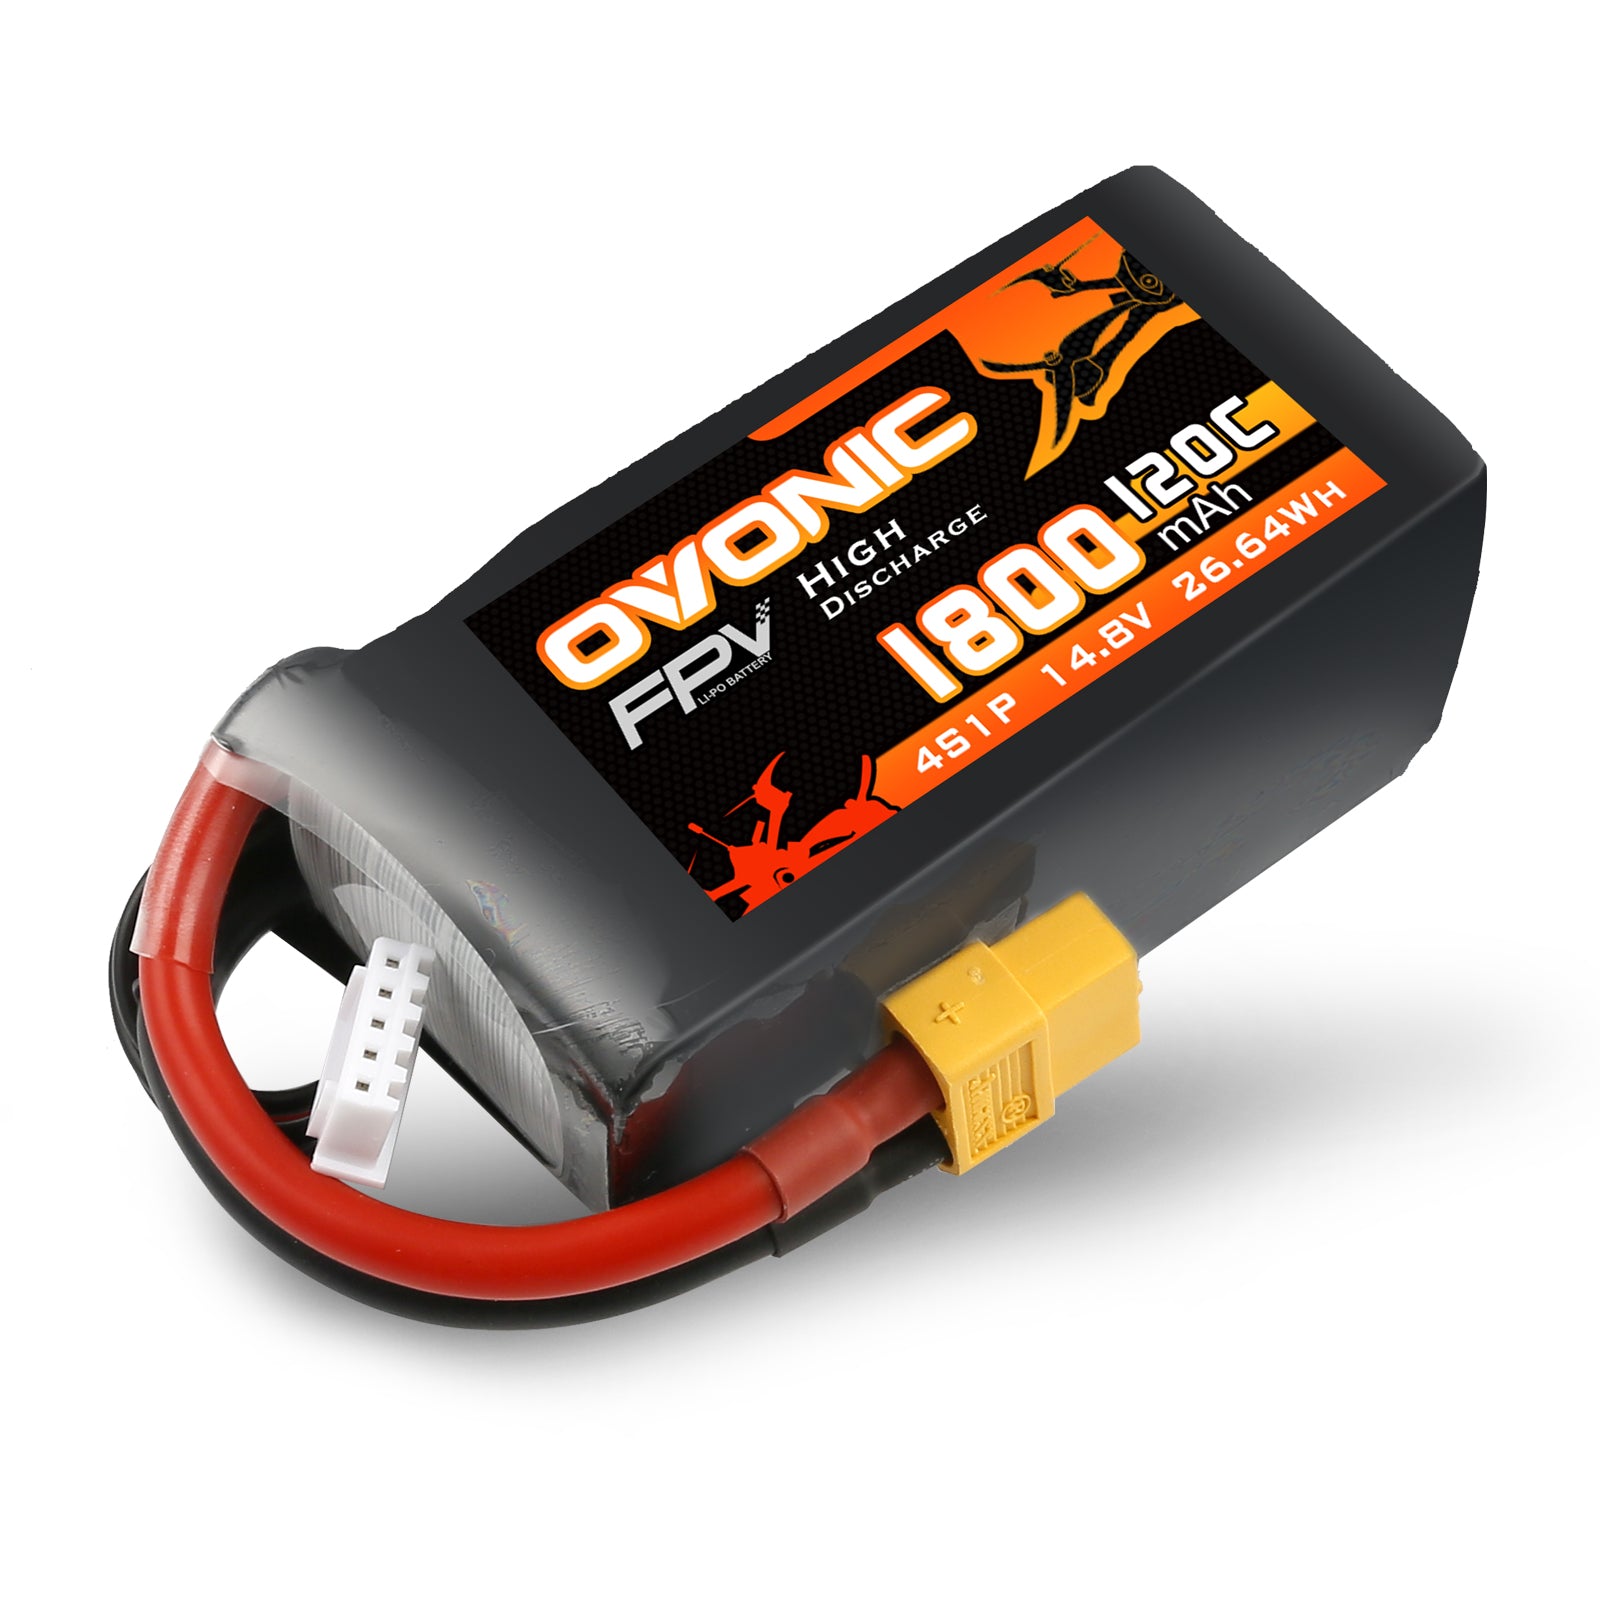 4×Ovonic 120C 4S 1800mAh LiPo Battery 14.8V Pack with XT60 Plug for FPV